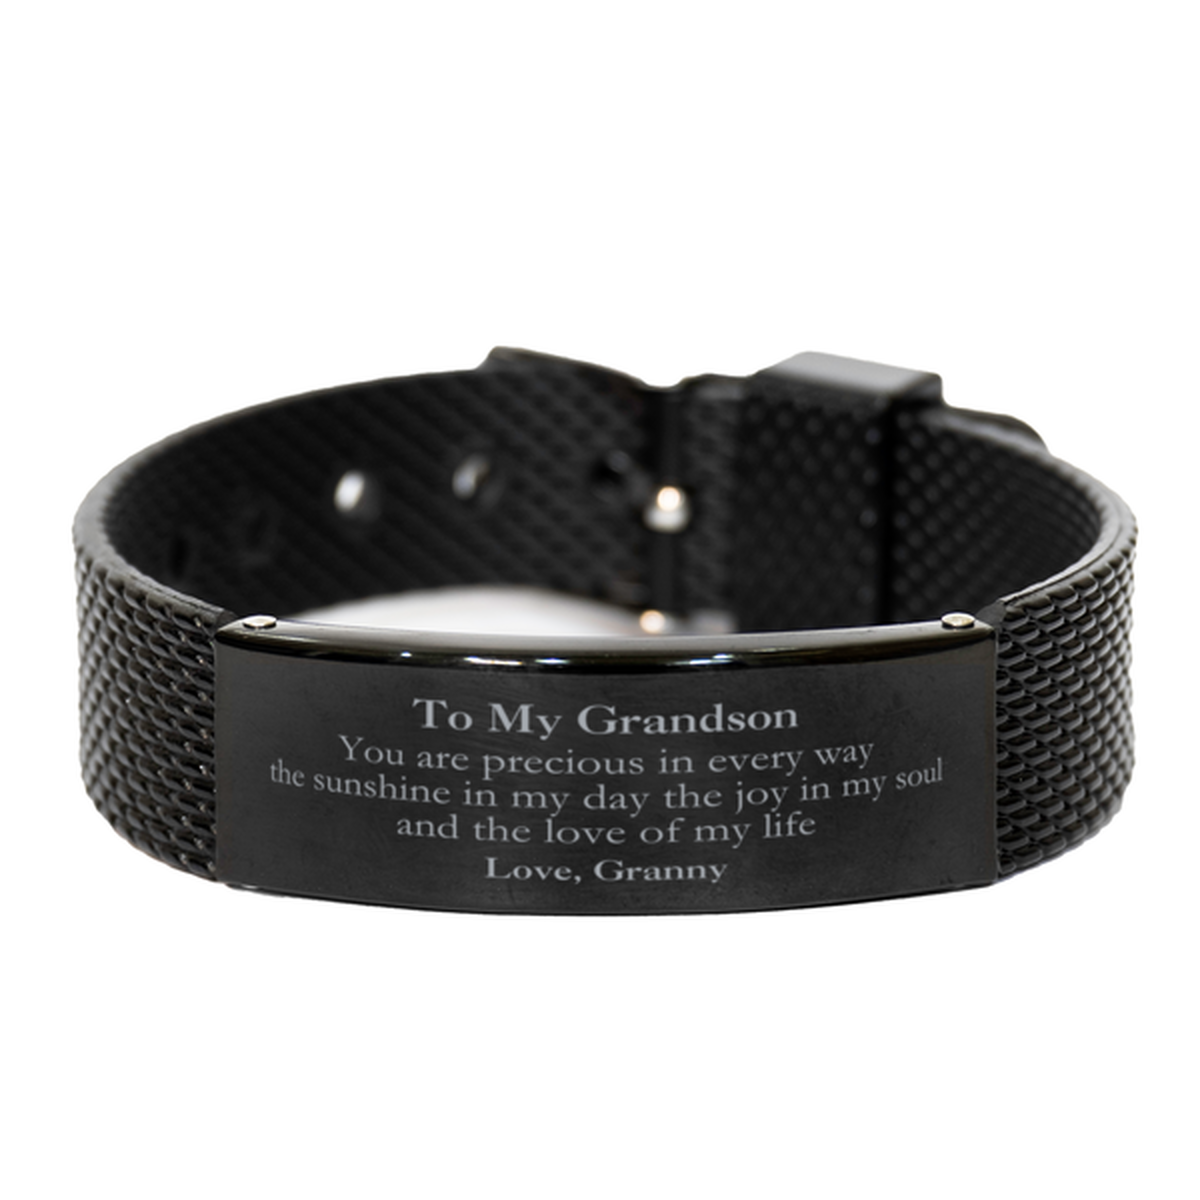 Graduation Gifts for Grandson Black Shark Mesh Bracelet Present from Granny, Christmas Grandson Birthday Gifts Grandson You are precious in every way the sunshine in my day. Love, Granny